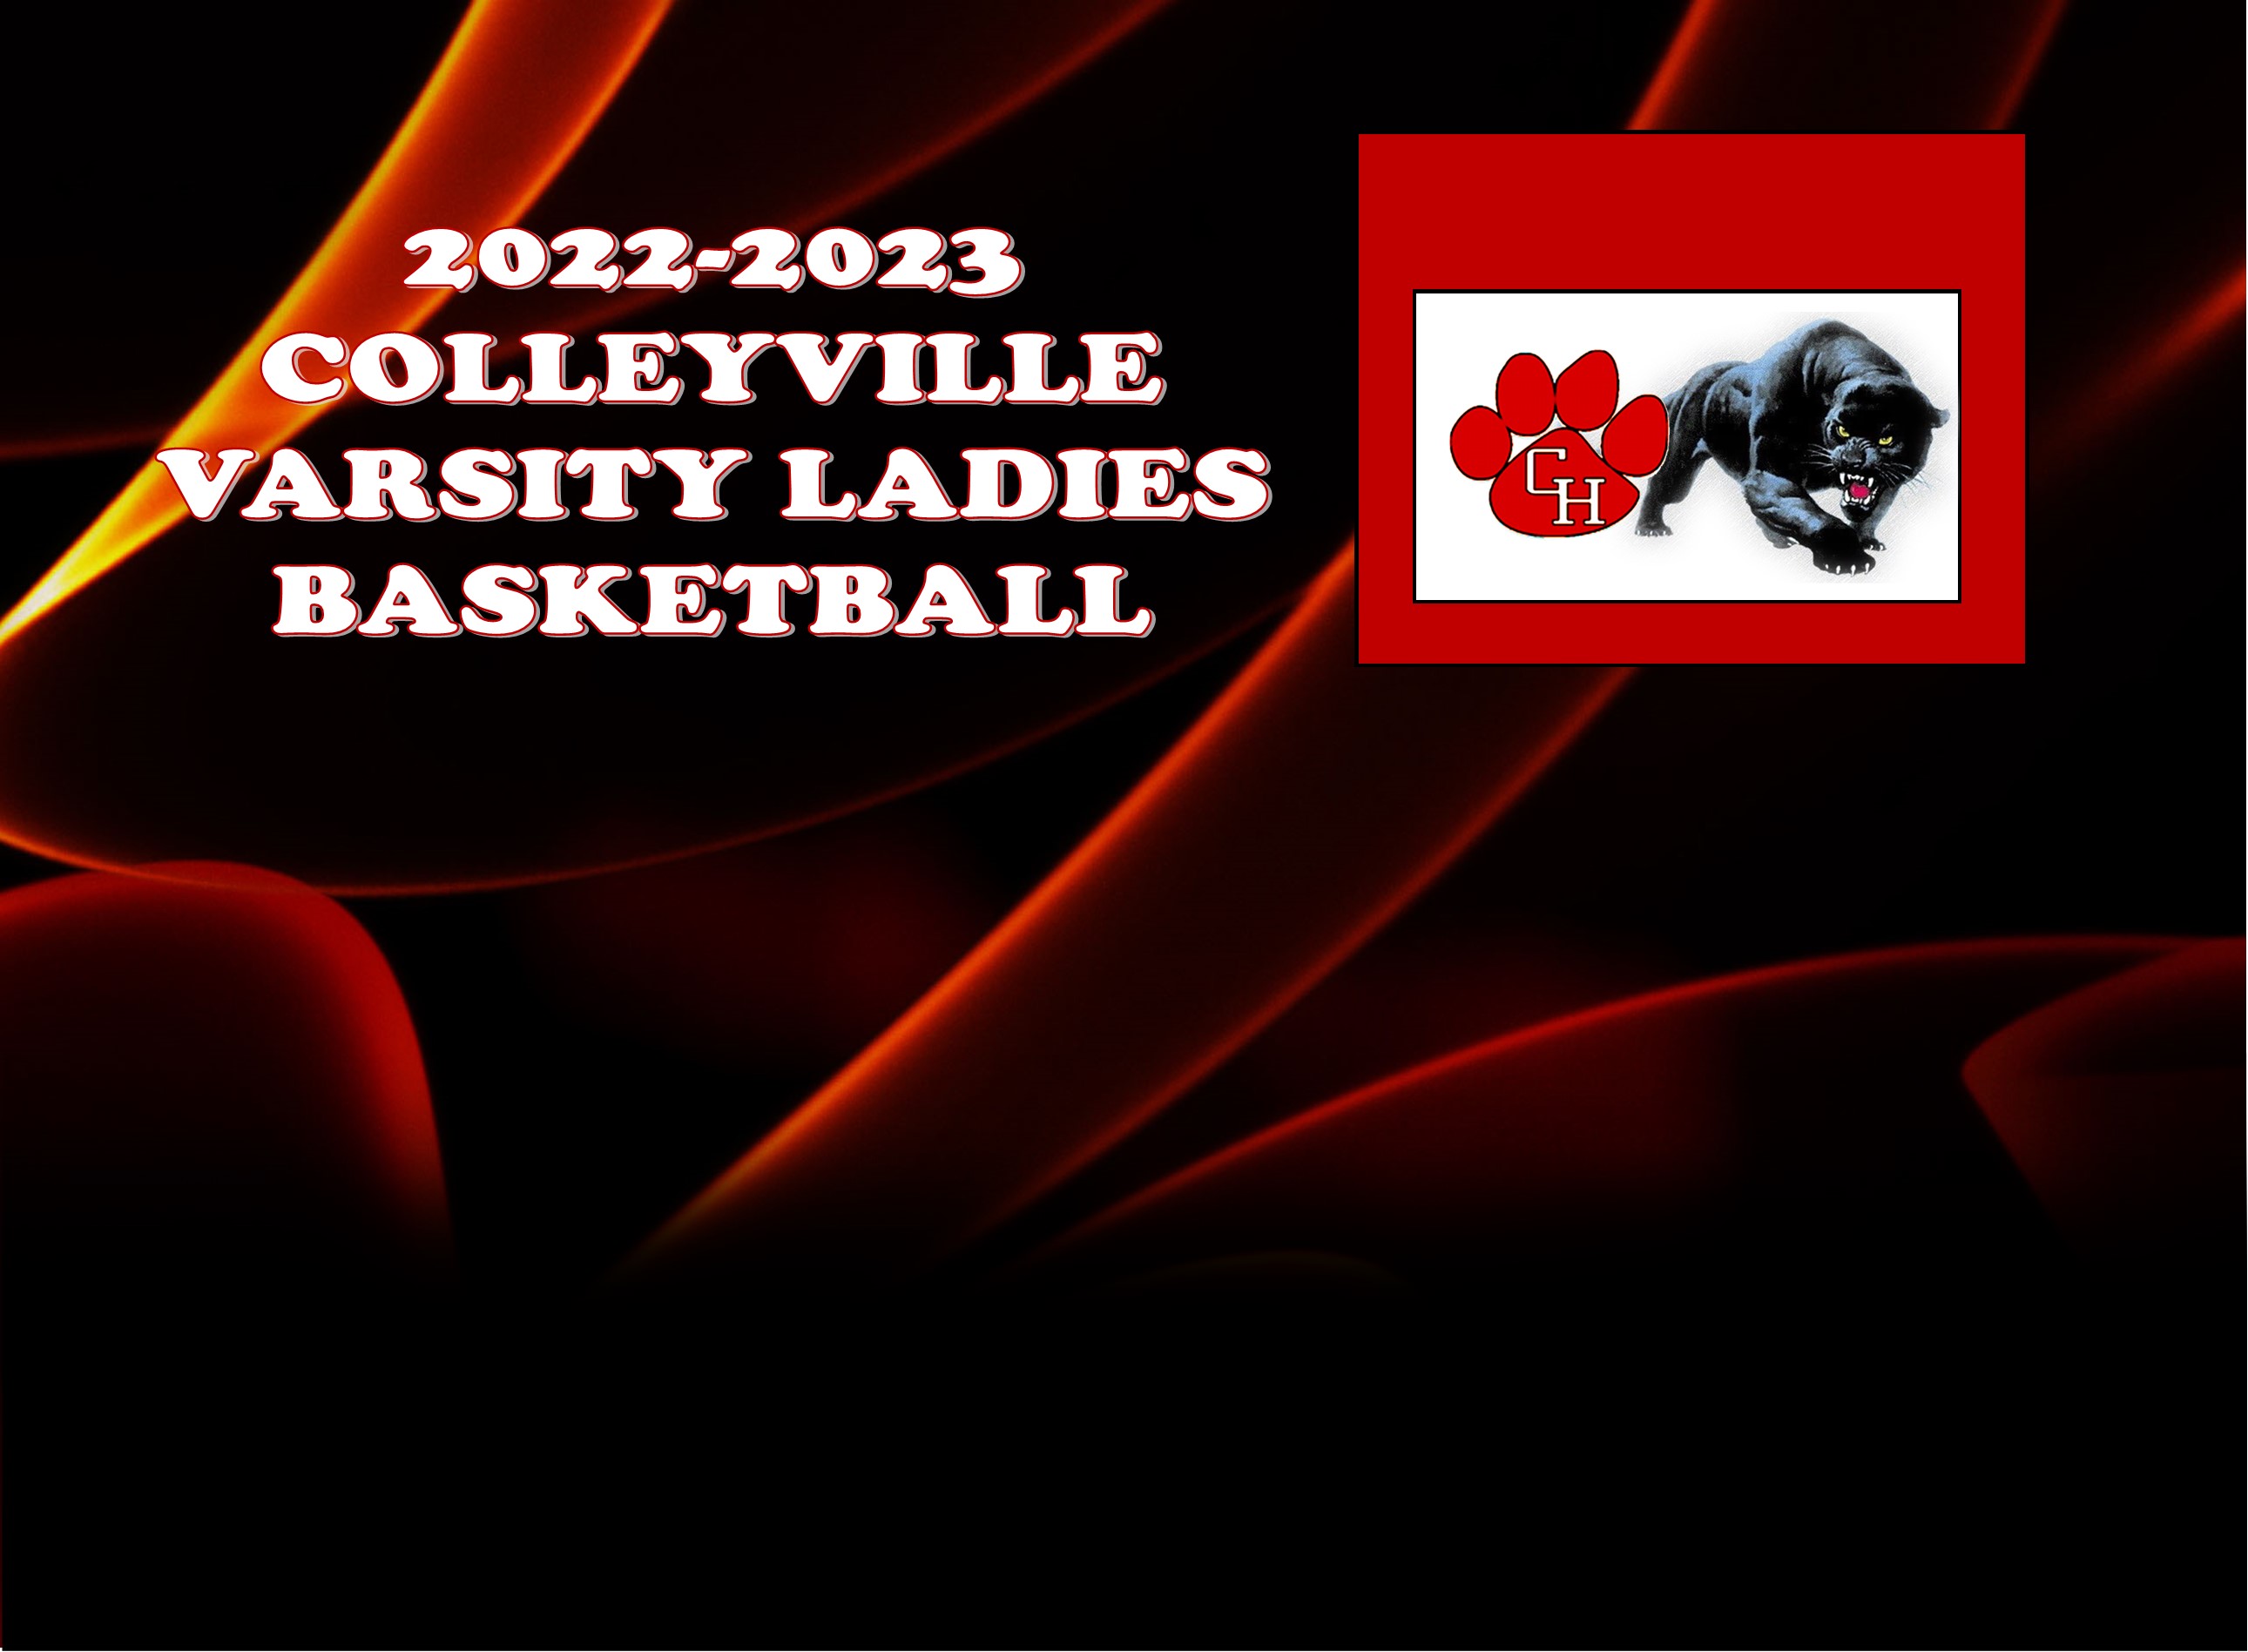 GCISD Varsity Basketball: Colleyville Lady Panthers Upend Pearce Lady Mustangs 62-46